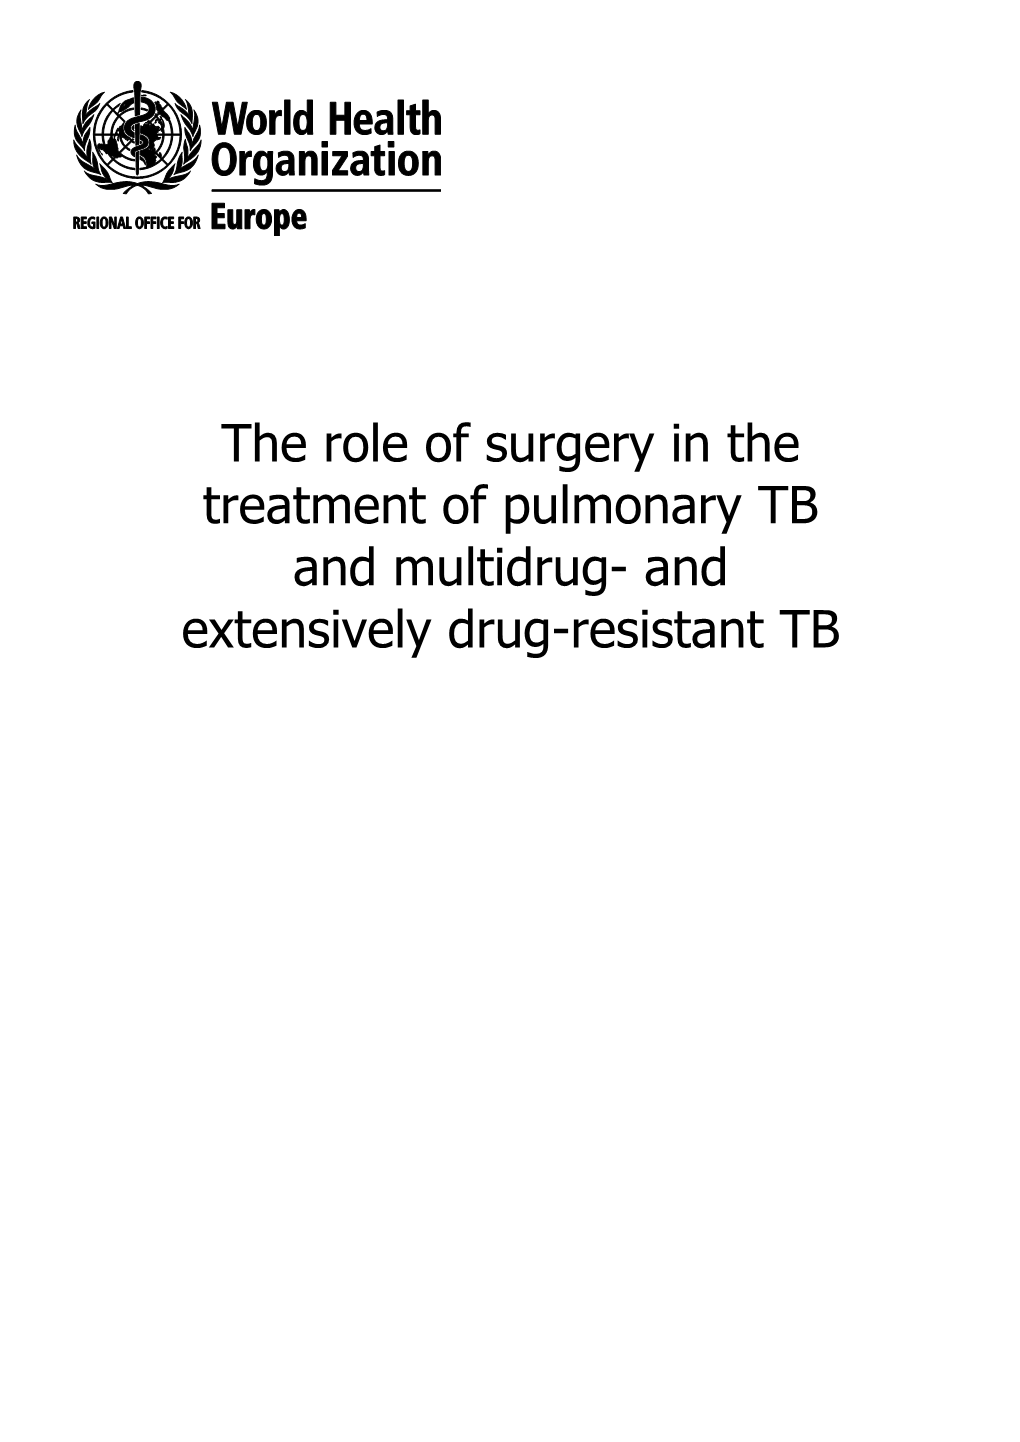 The Role of Surgery in the Treatment of Pulmonary TB and Multidrug- and Extensively Drug-Resistant TB